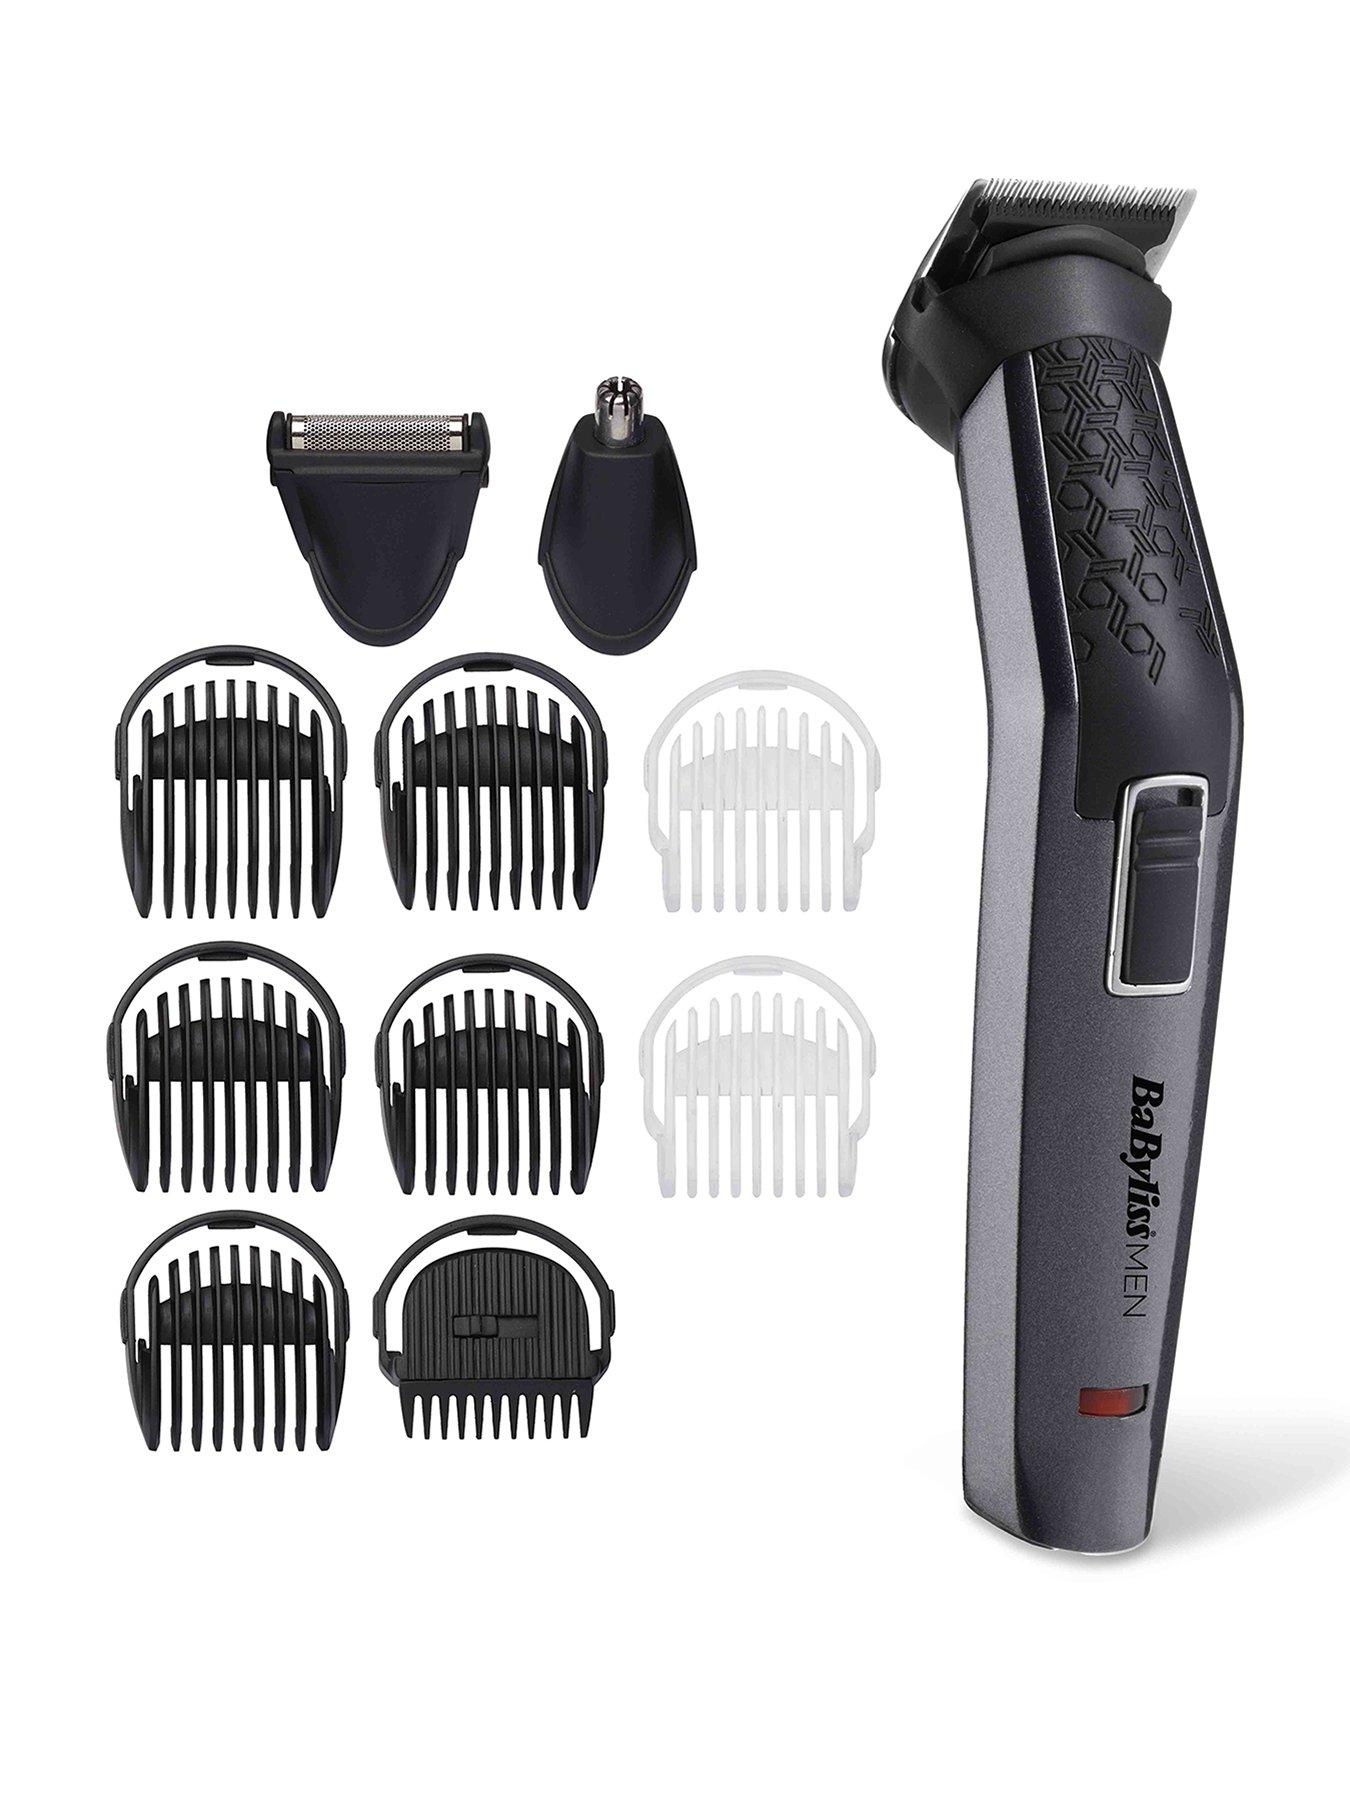 boots chemist hair clippers